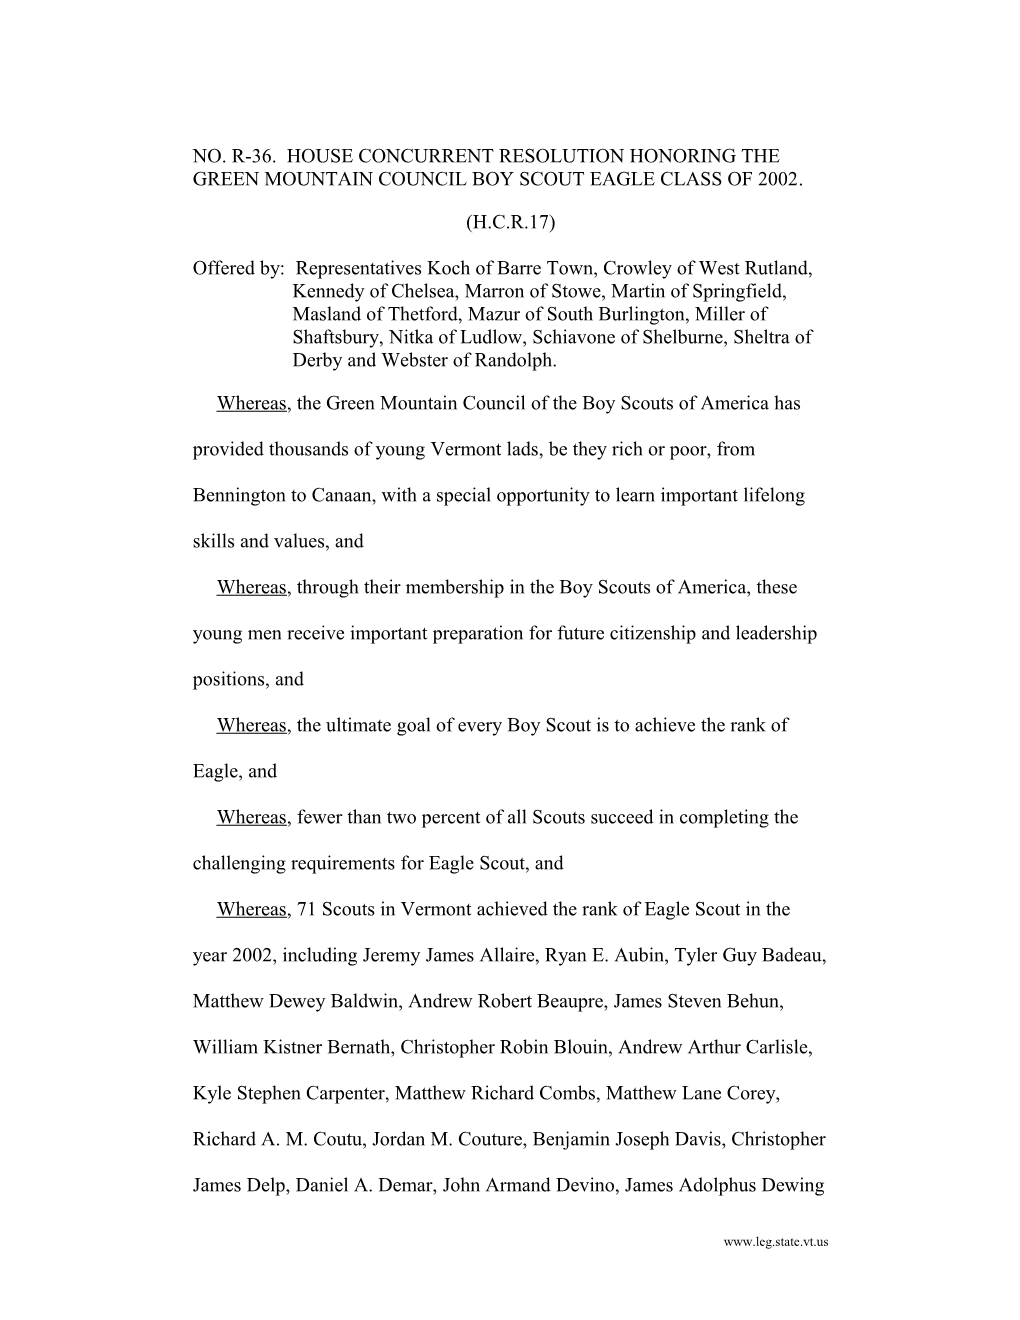 NO. R-36. House Concurrent Resolution Honoring the Green Mountain Council Boy Scout Eagle